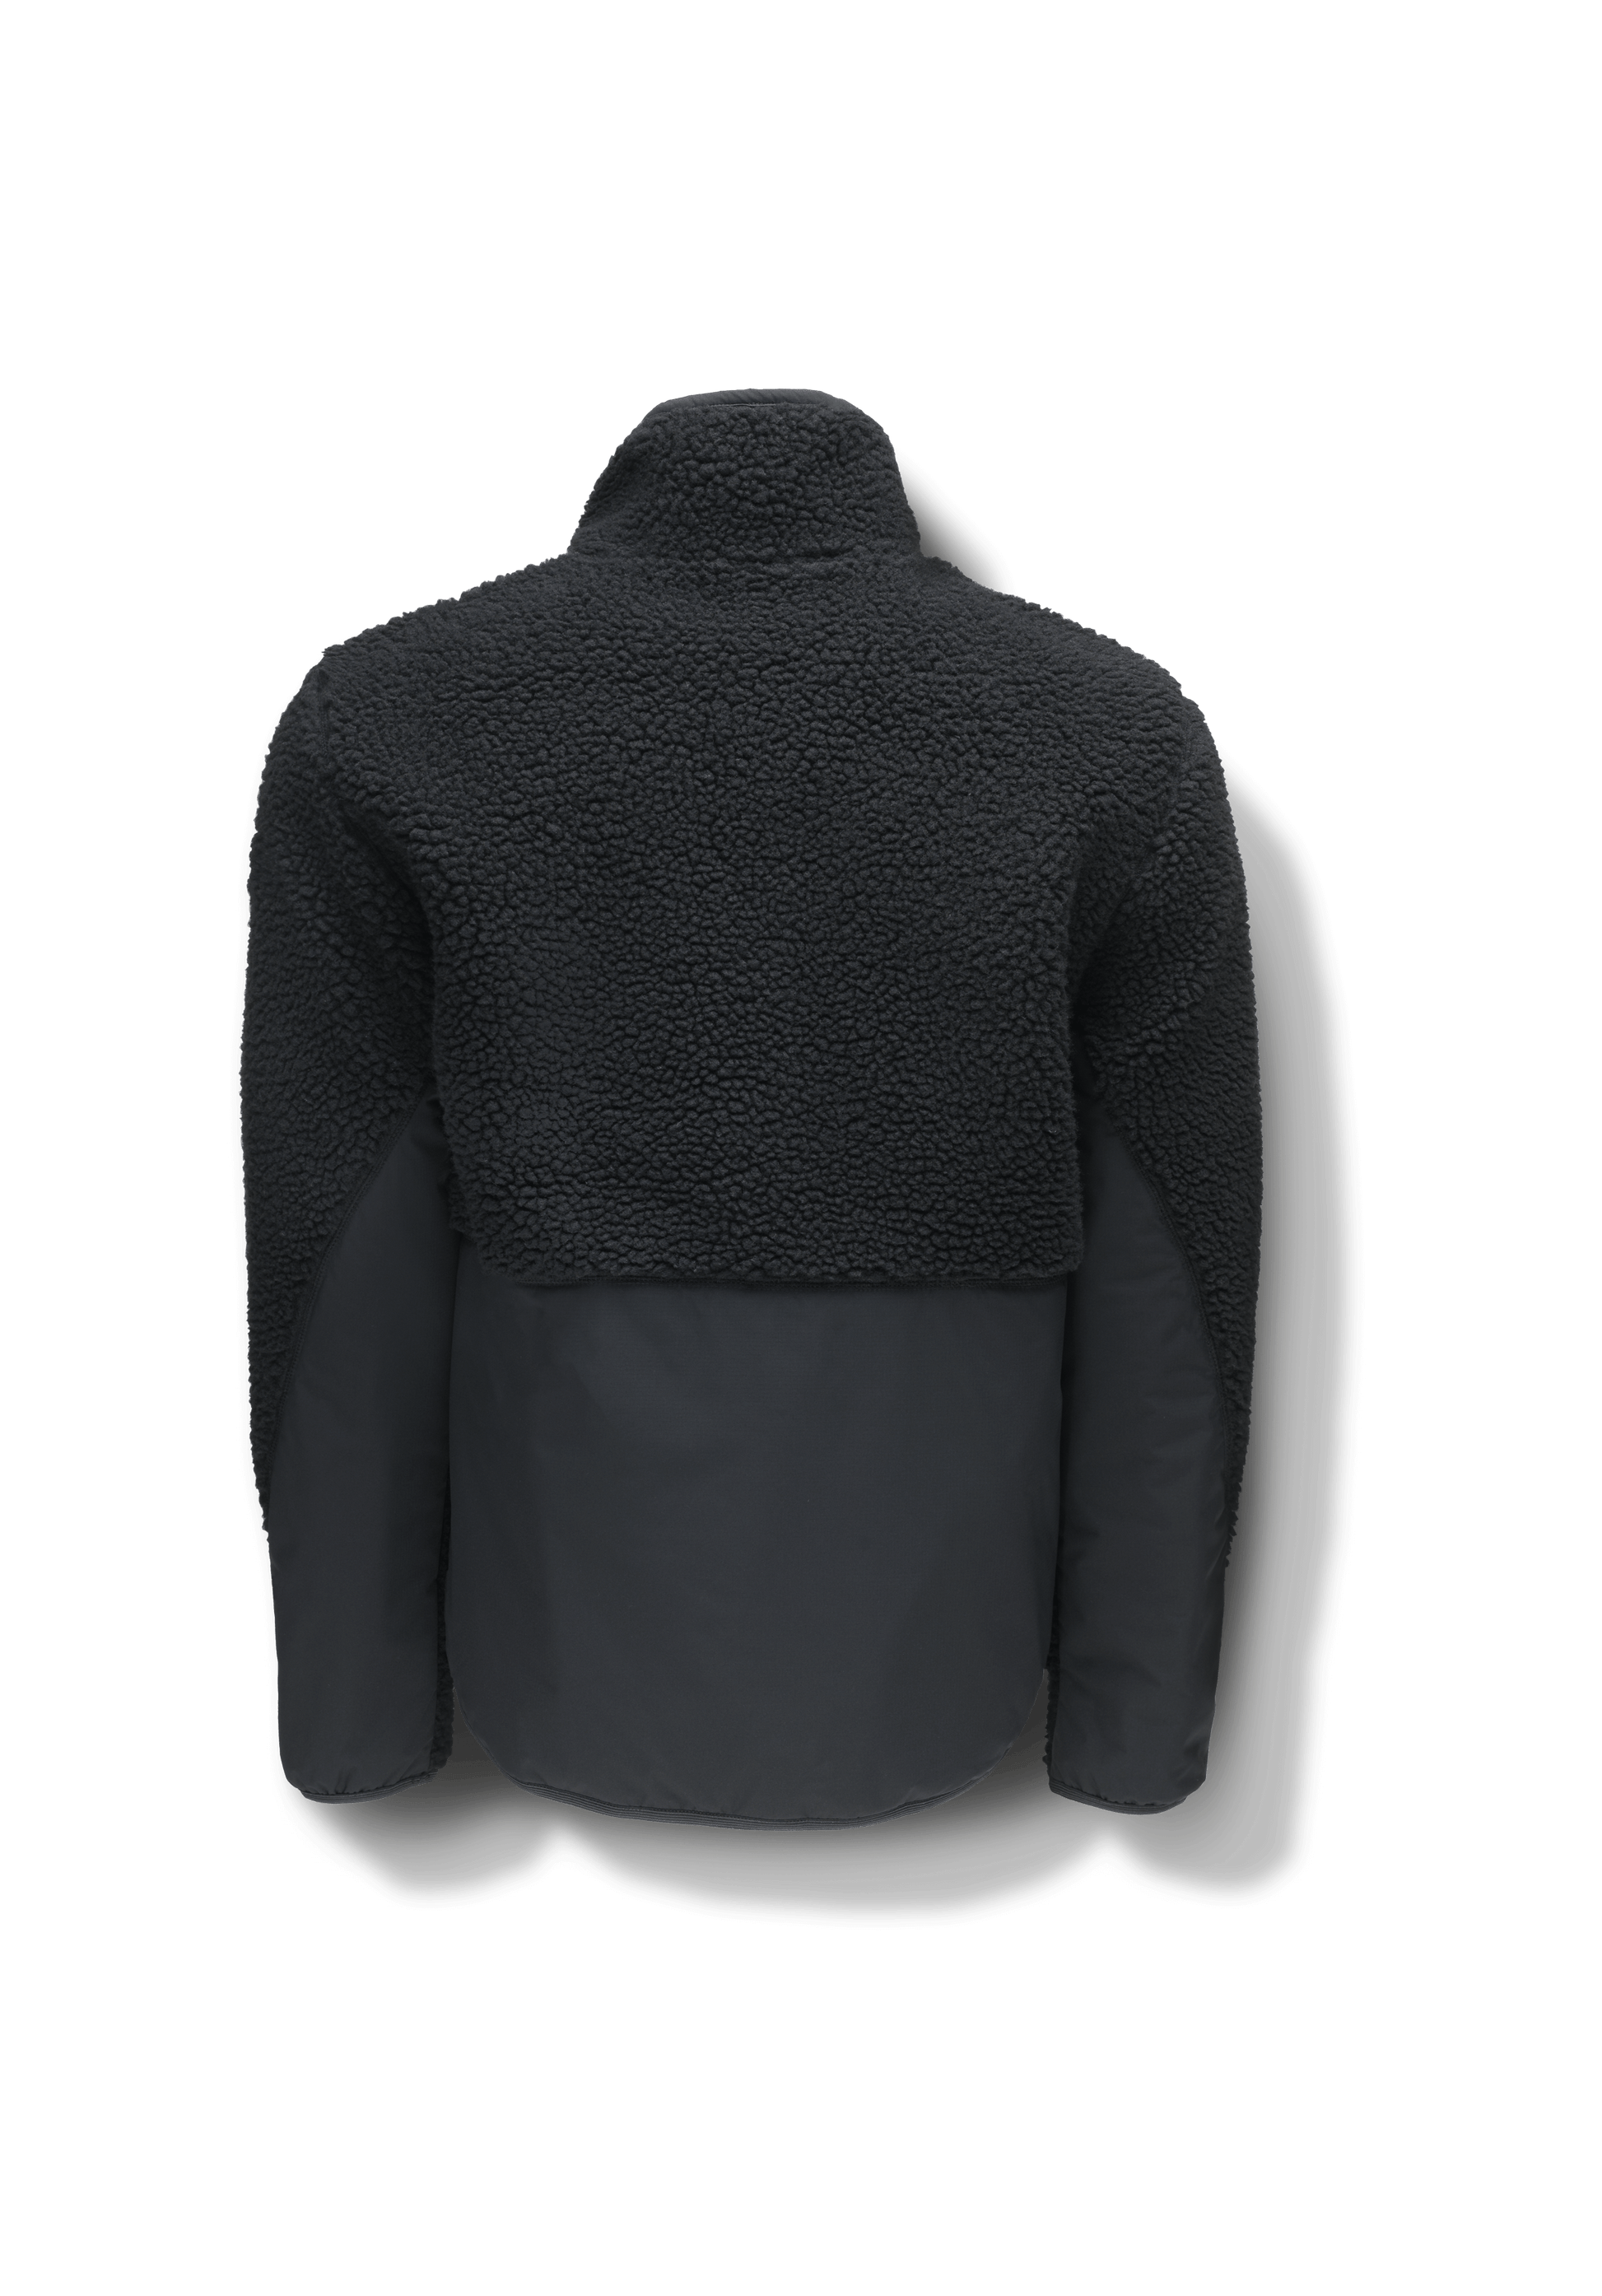 Kepler Men's Berber Zip Front Sweater in hip length, premium berber and stretch ripstop fabrication, Primaloft Gold Insulation Active+, two-way centre-front zipper, zipper pocket at left chest, magnetic closure flap pockets at waist with additional side-entry pockets, in Black